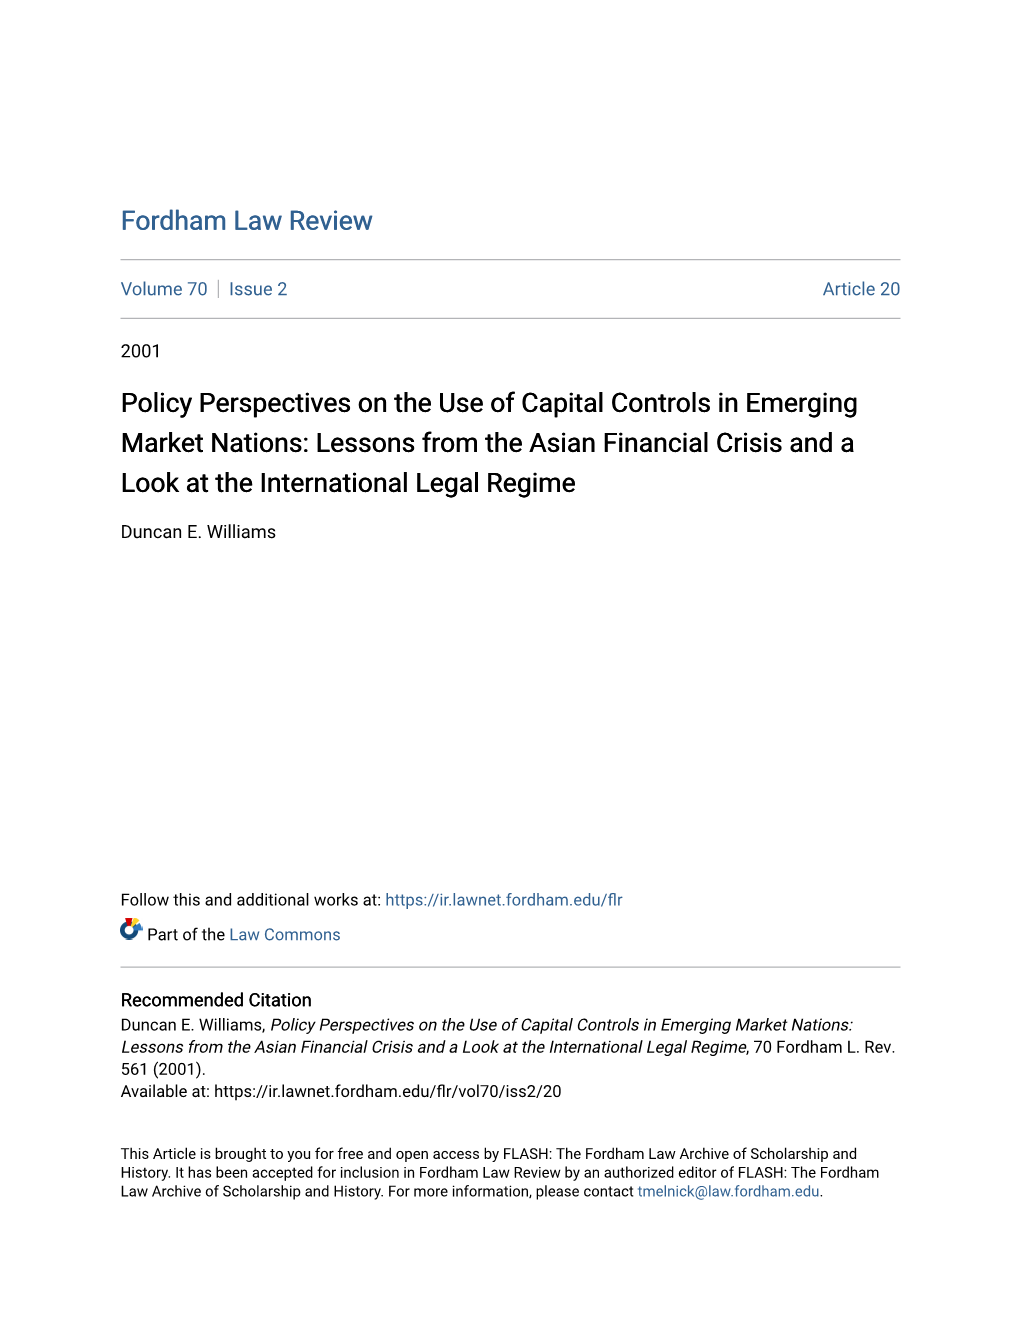 Policy Perspectives on the Use of Capital Controls in Emerging Market Nations: Lessons from the Asian Financial Crisis and a Look at the International Legal Regime